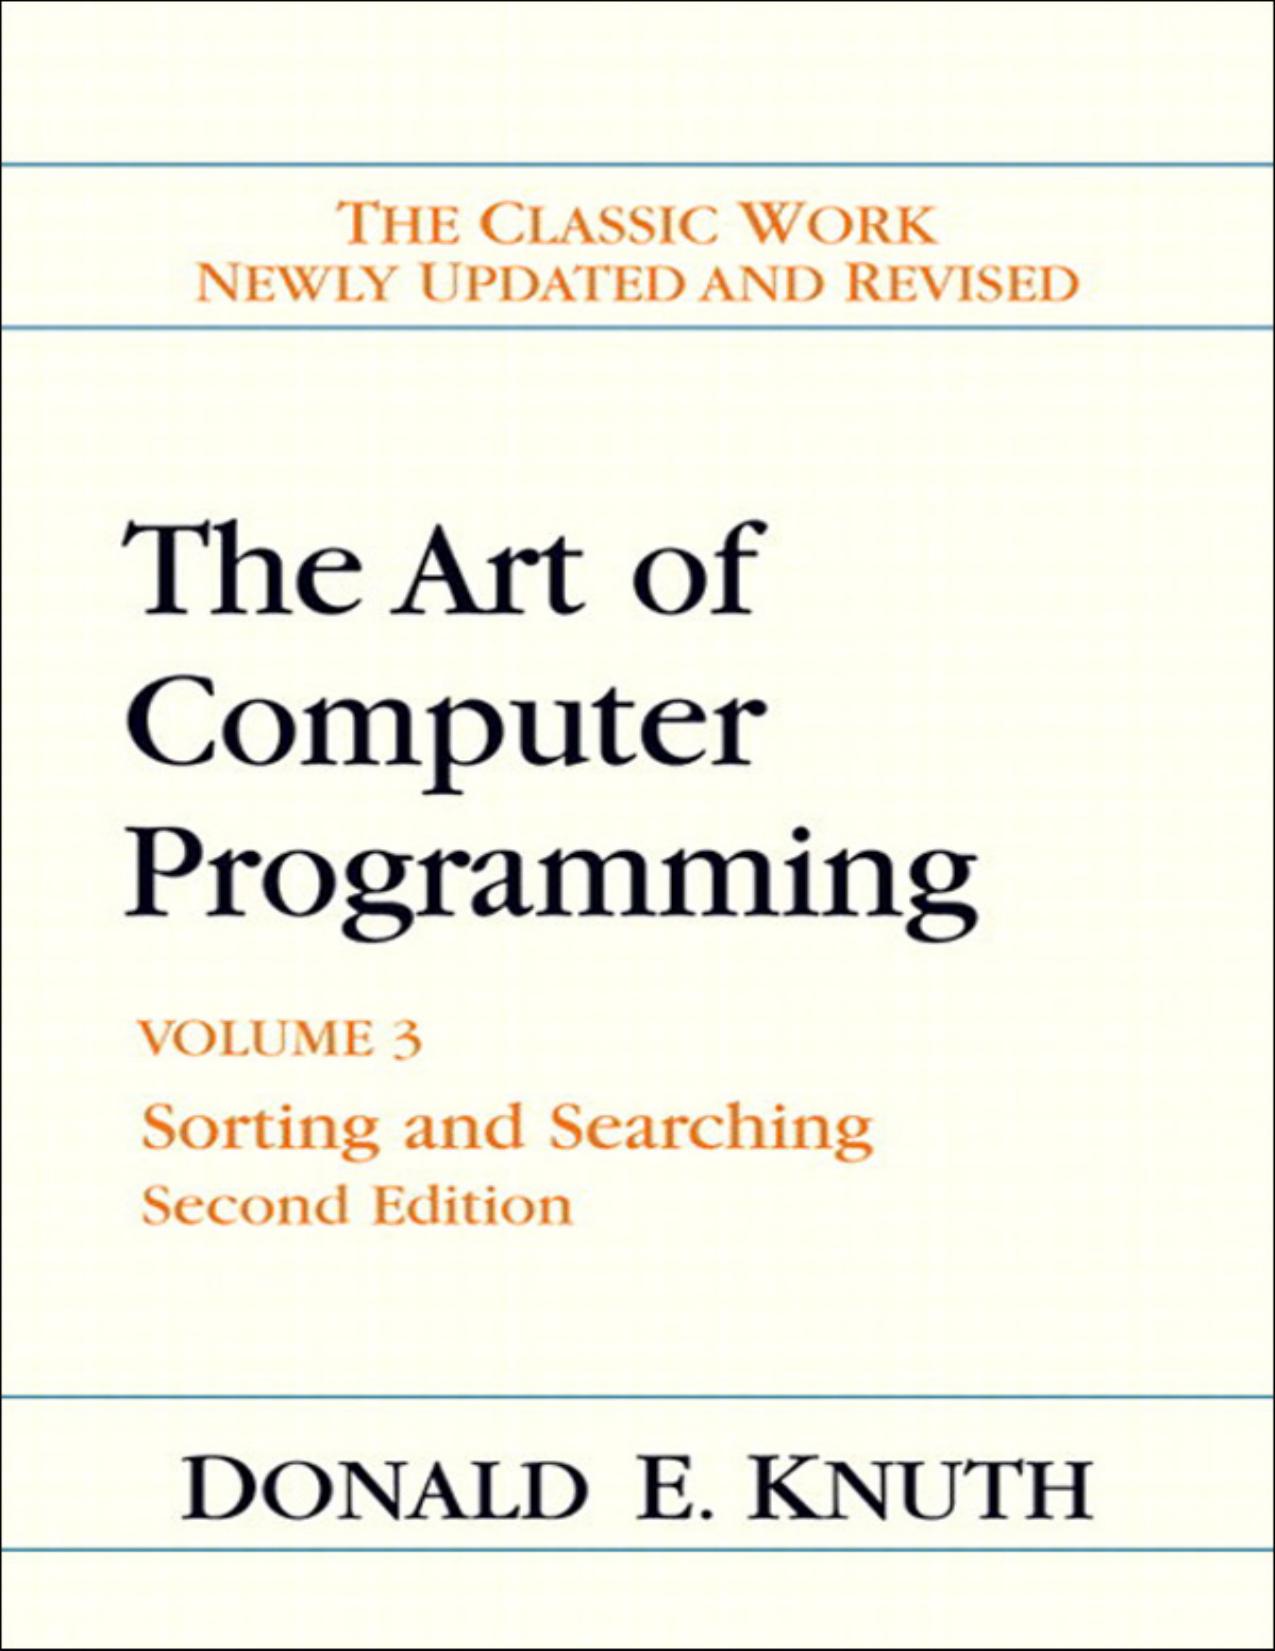 The Art of Computer Programming, Volume 3: Sorting and Searching, Second Edition by Donald E. Knuth